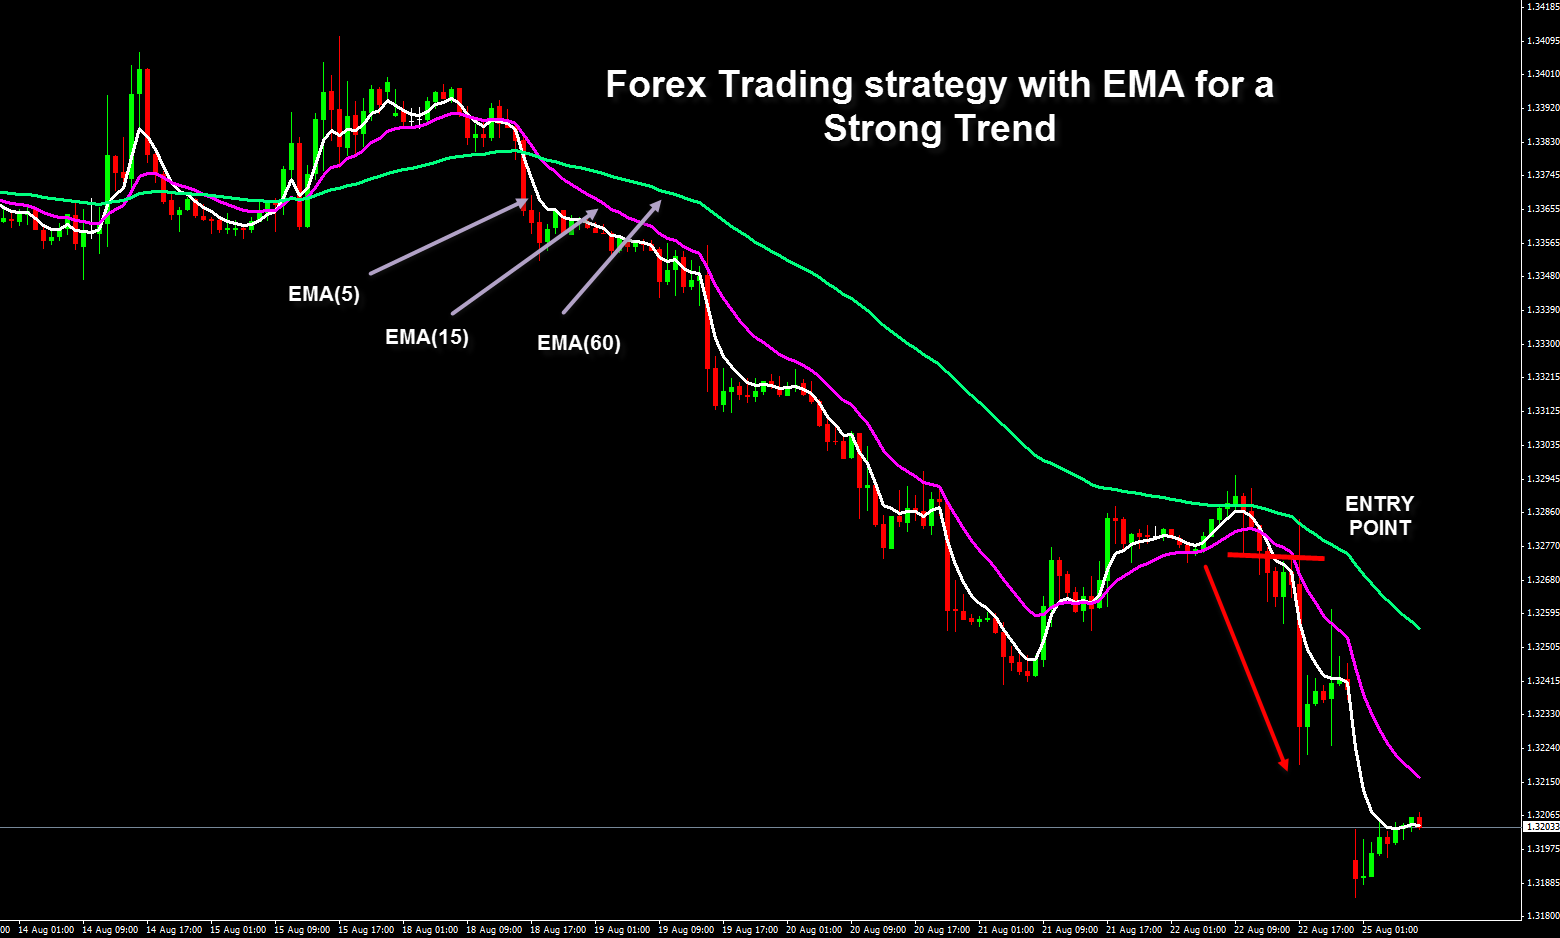 Forex Trading strategy with EMA for a Strong Trend | Forex Signals Market